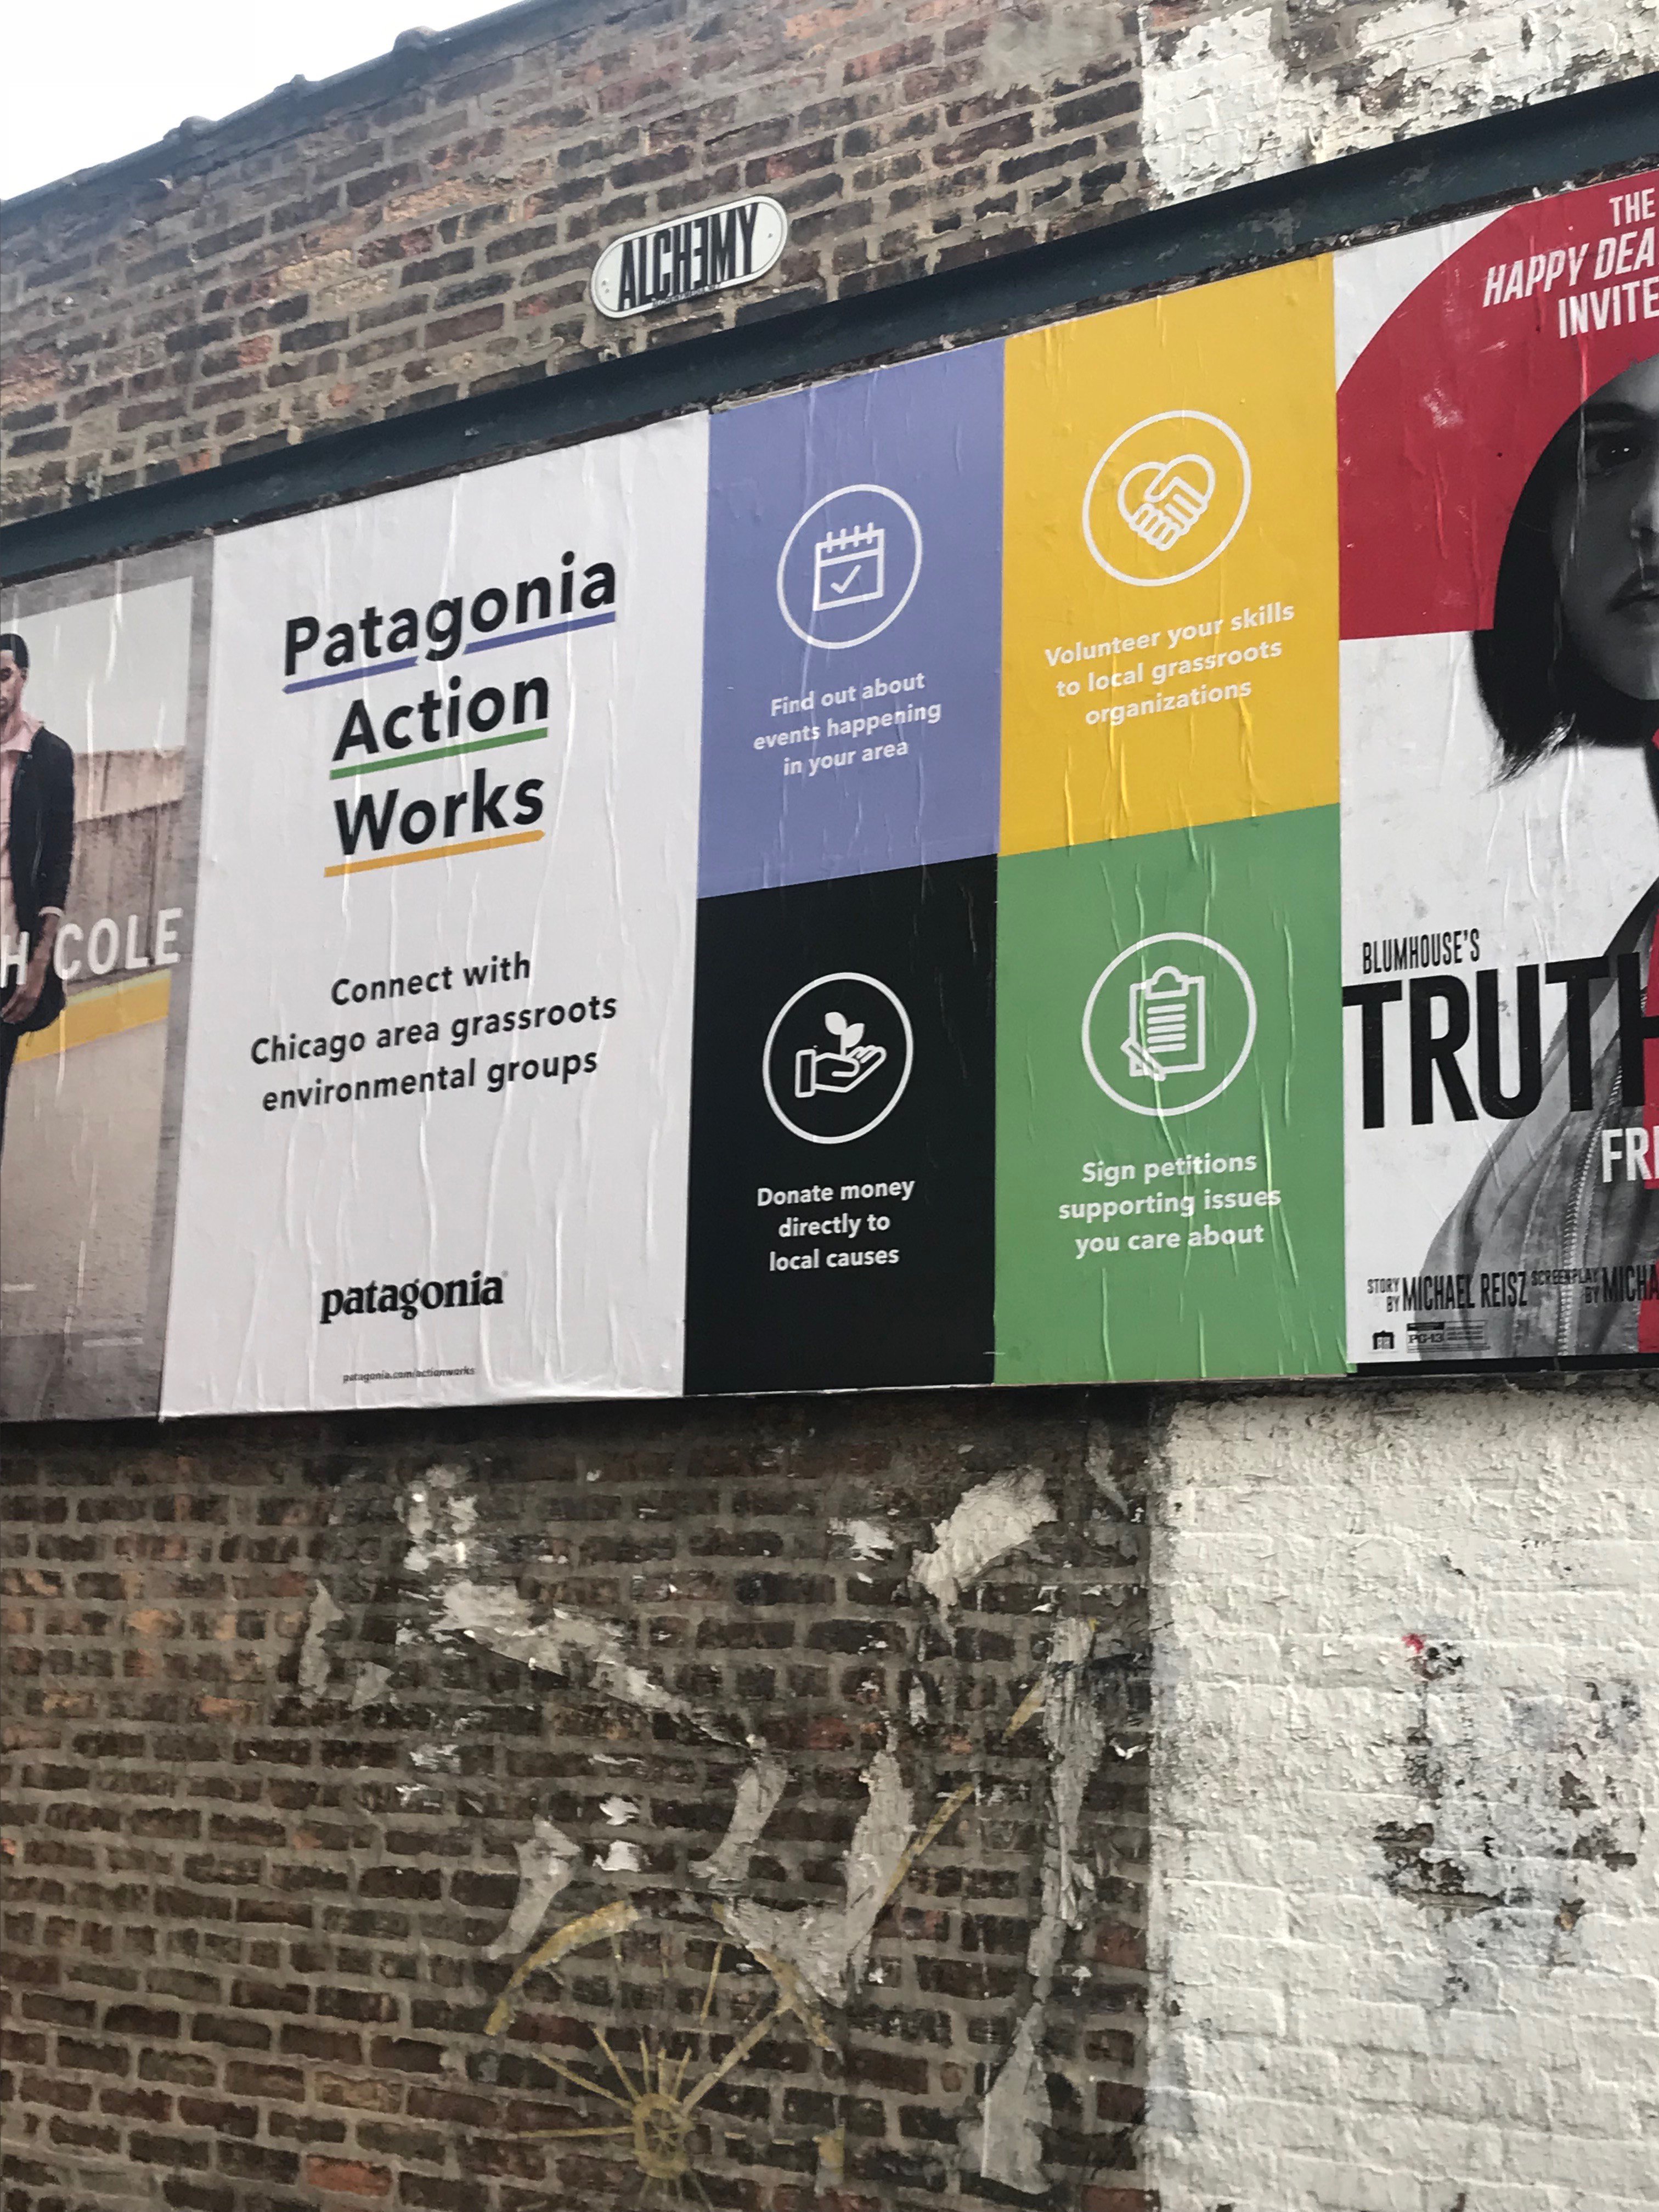 Notebaert Nature Museum on Twitter: "We spotted this @patagonia Action Works billboard on Broadway! We're proud work w/ #PatagoniaChicago &amp; are thrilled to a part of the Works